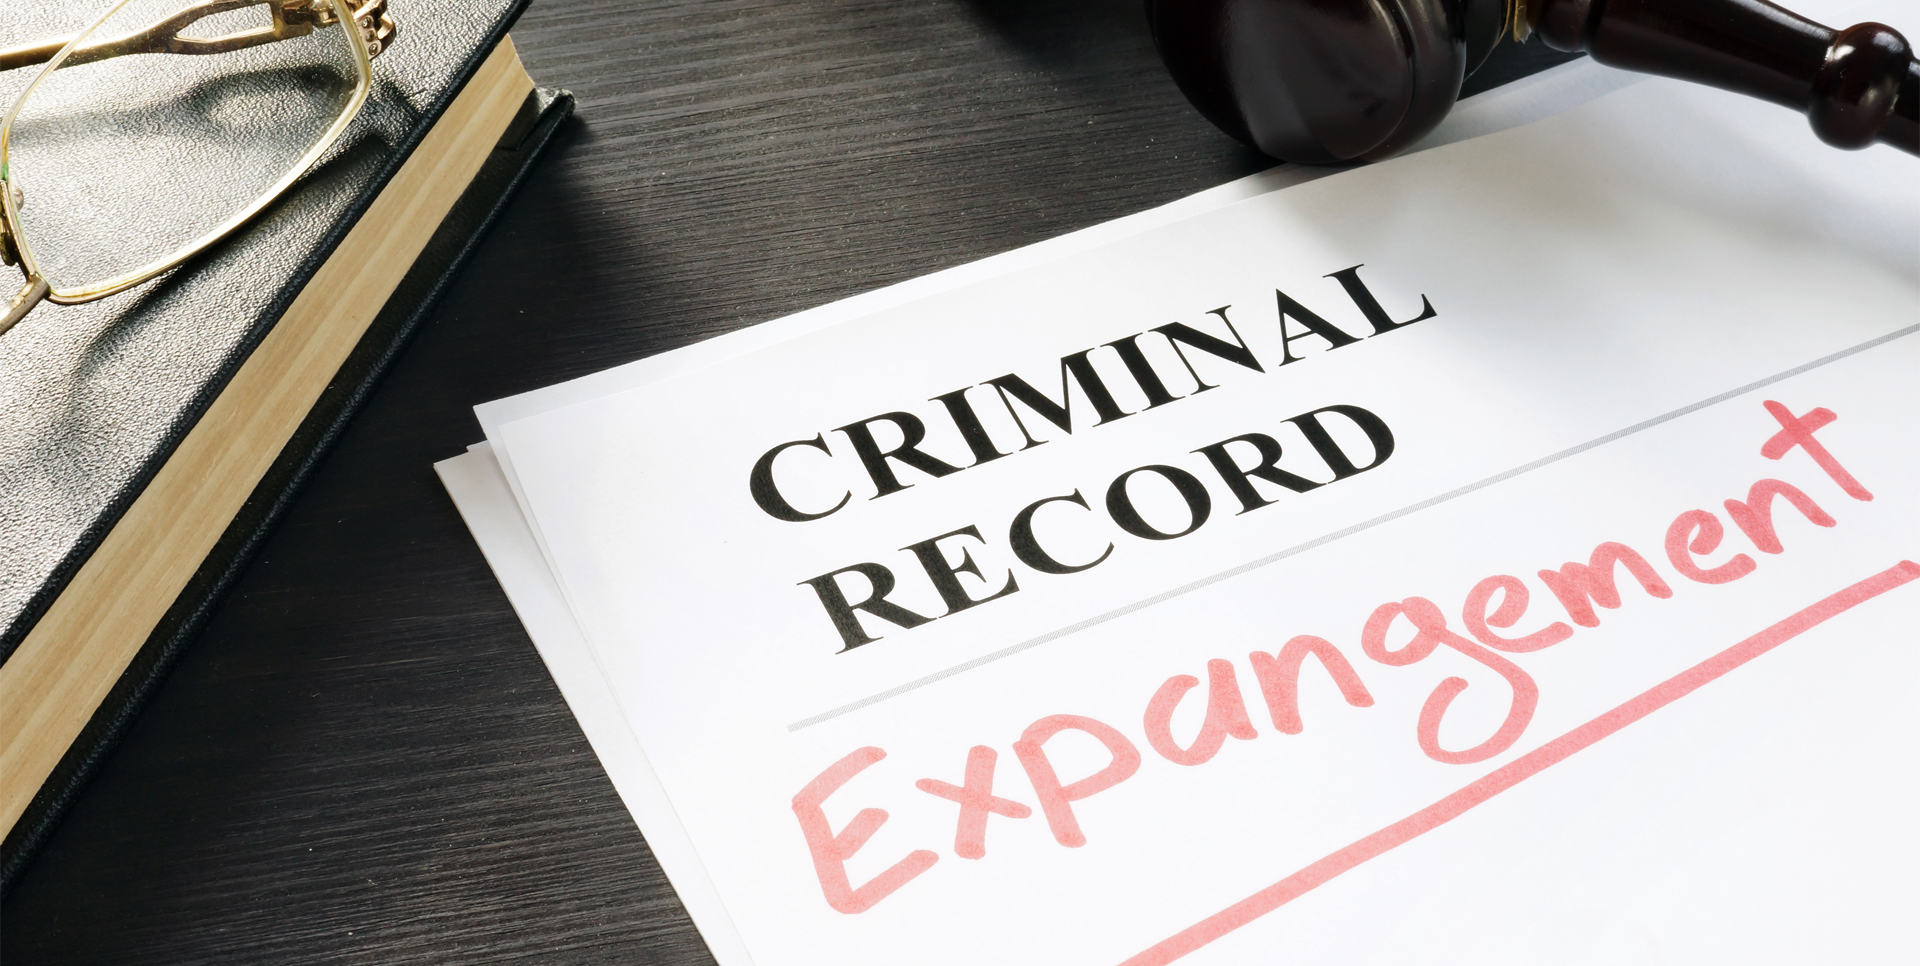 Expungement, also called record sealing, is a legal way to hide certain criminal records from public view.